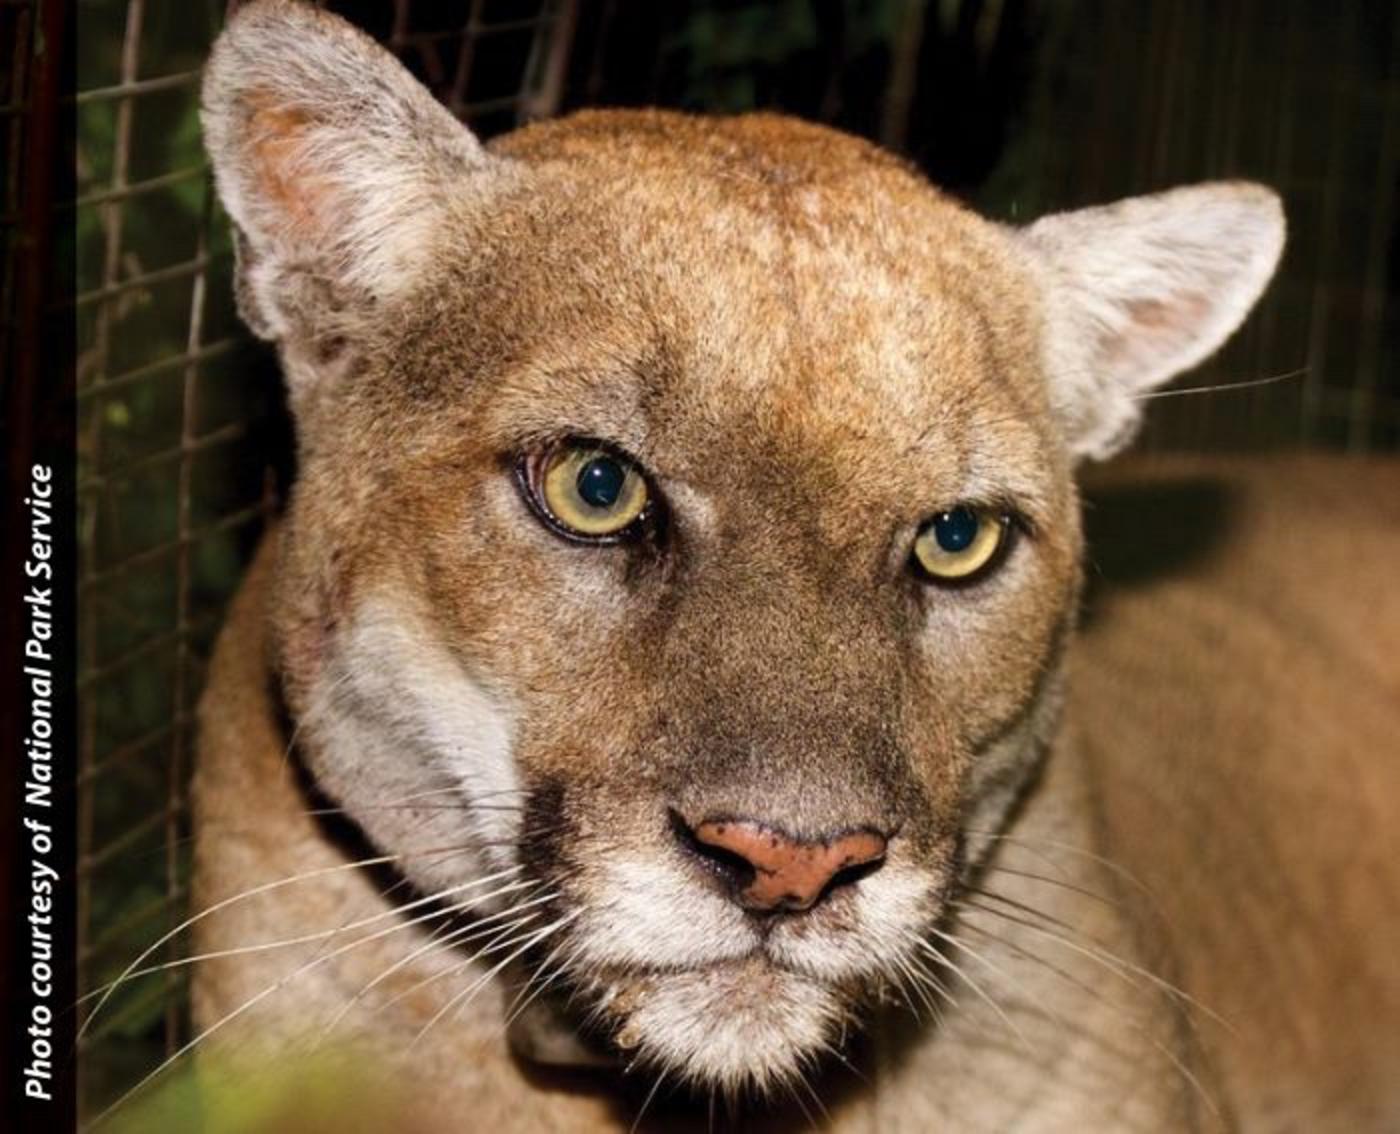 Photo of Mountain Lion P-22 in southern California courtesy National Park Service